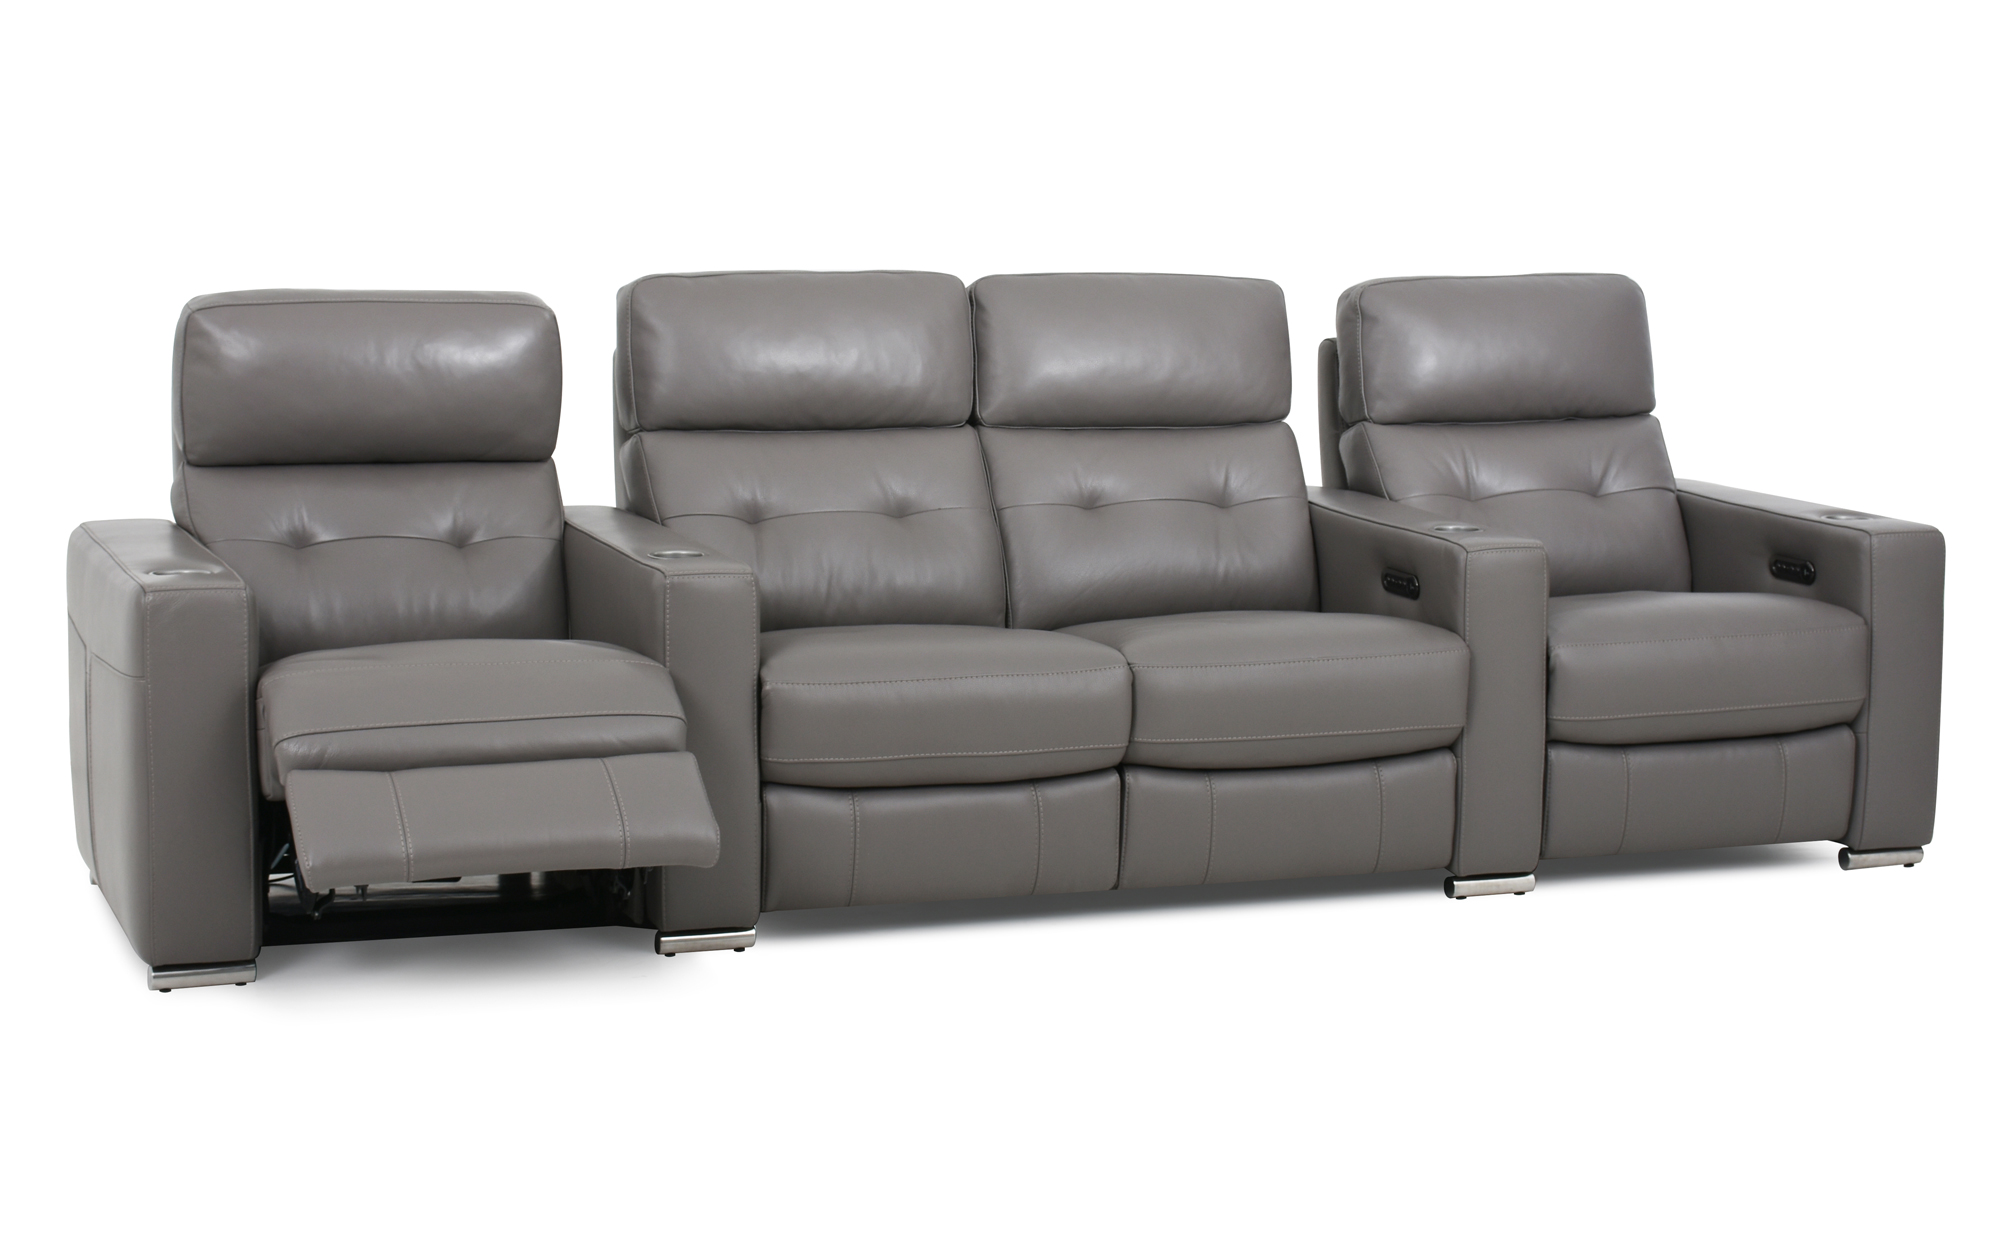 FrontRow™ Serenity Powered Recliners